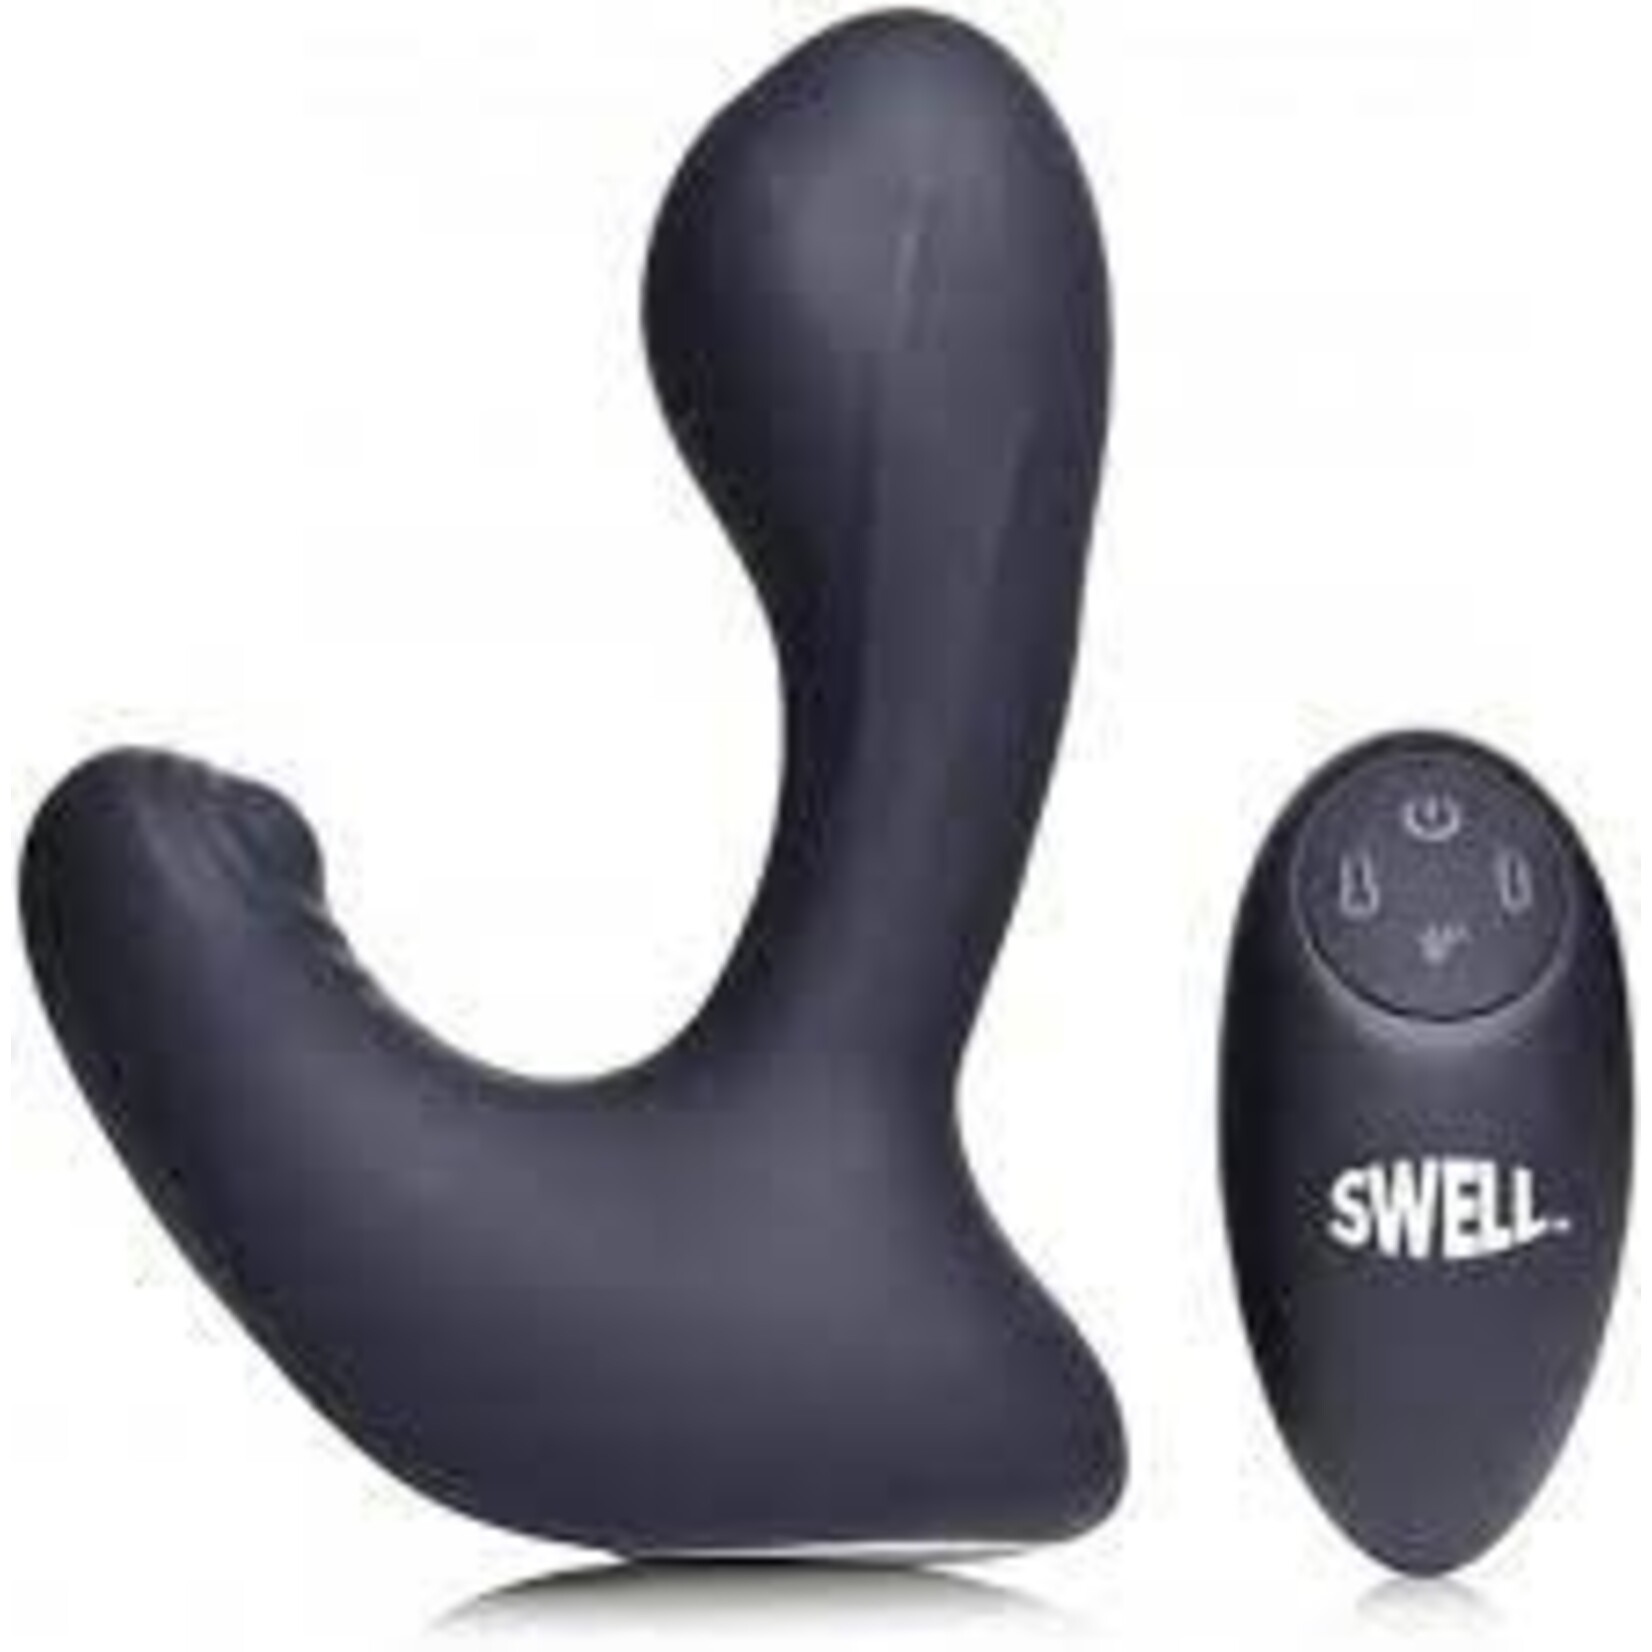 Swell Swell 10X inflatable and tapping Prostate Vibe